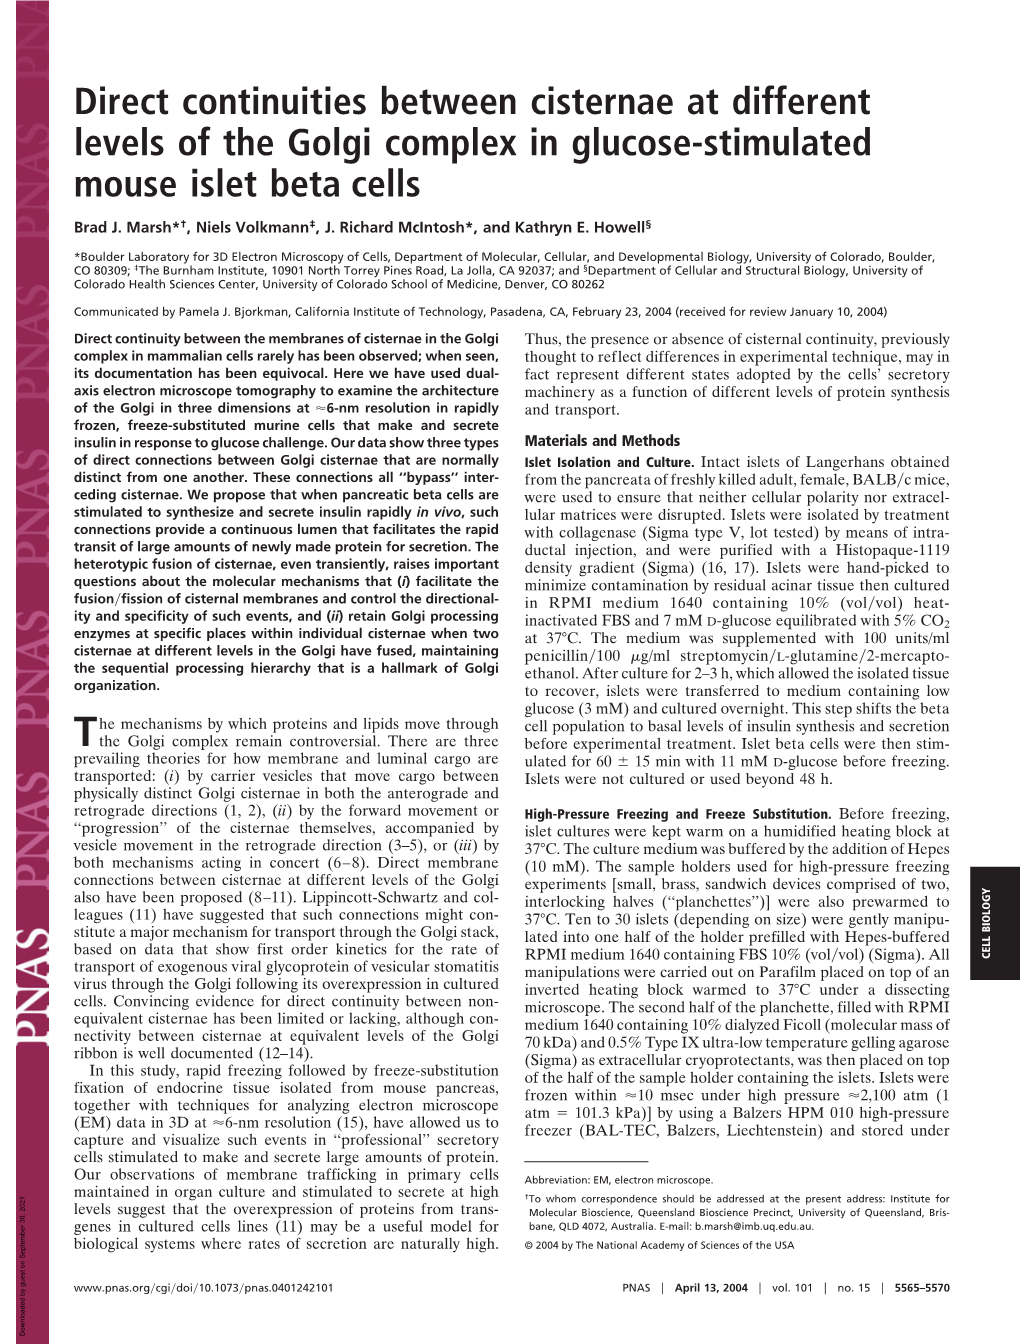 Direct Continuities Between Cisternae at Different Levels of the Golgi Complex in Glucose-Stimulated Mouse Islet Beta Cells